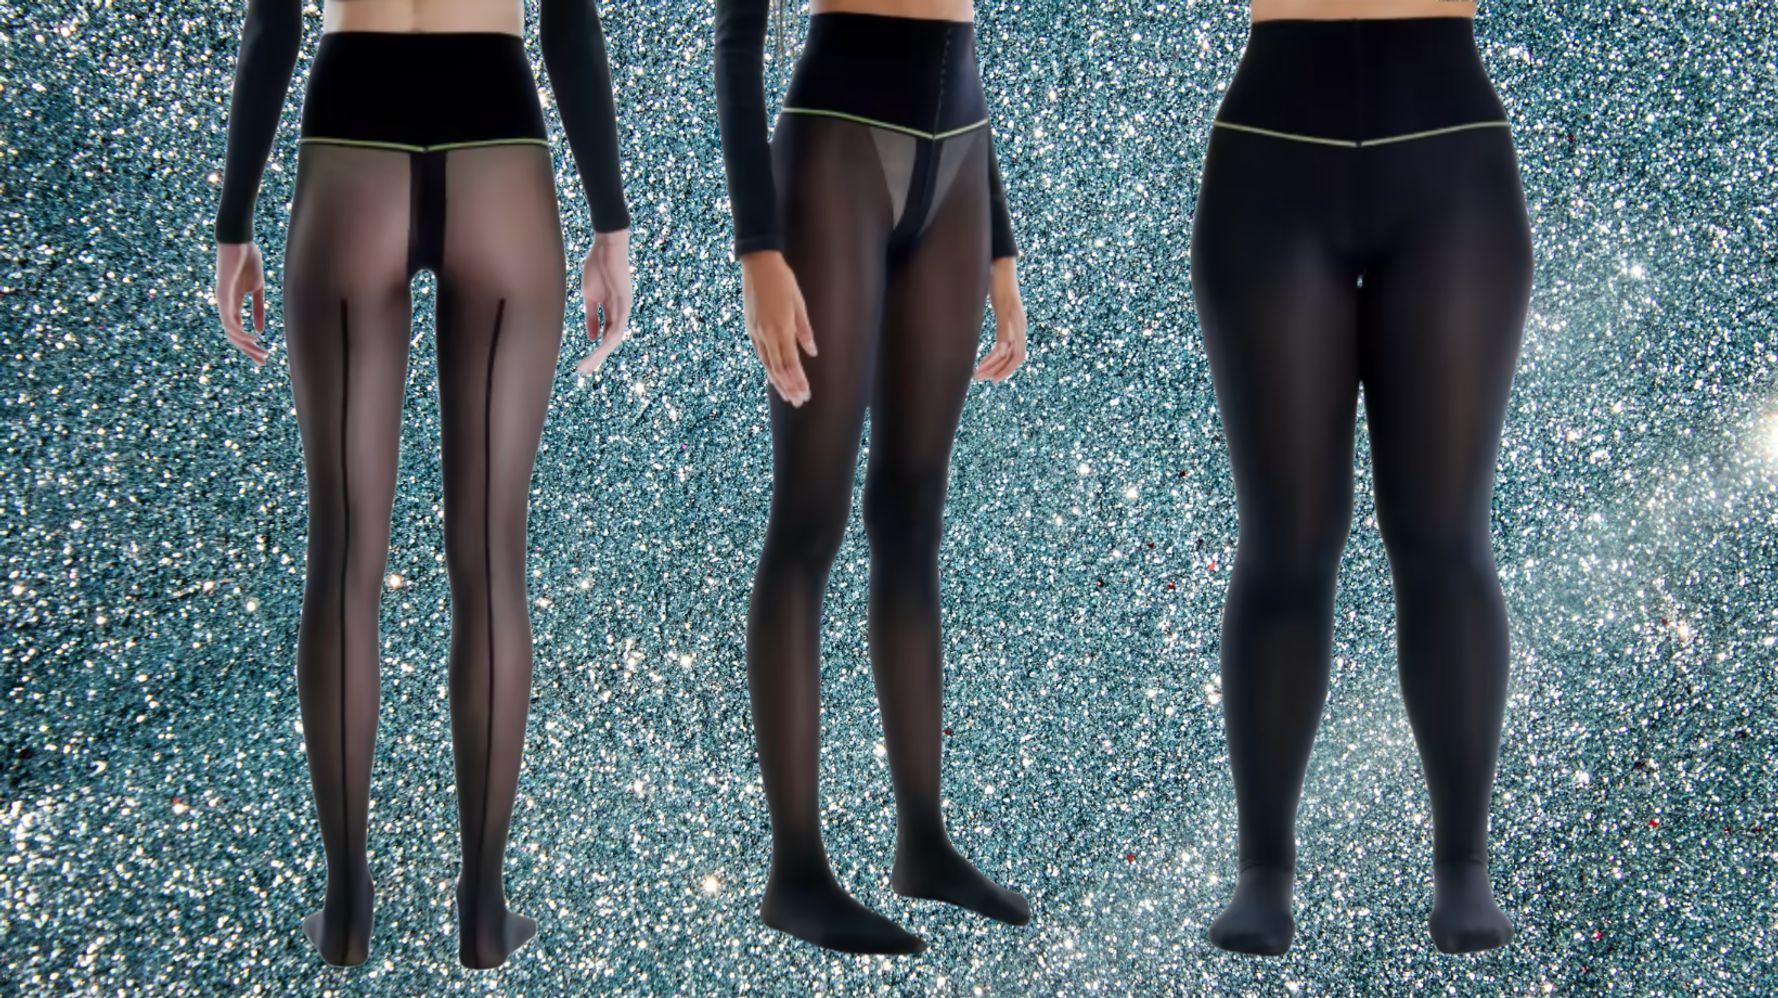 Shiny tights without fingertip reinforcement